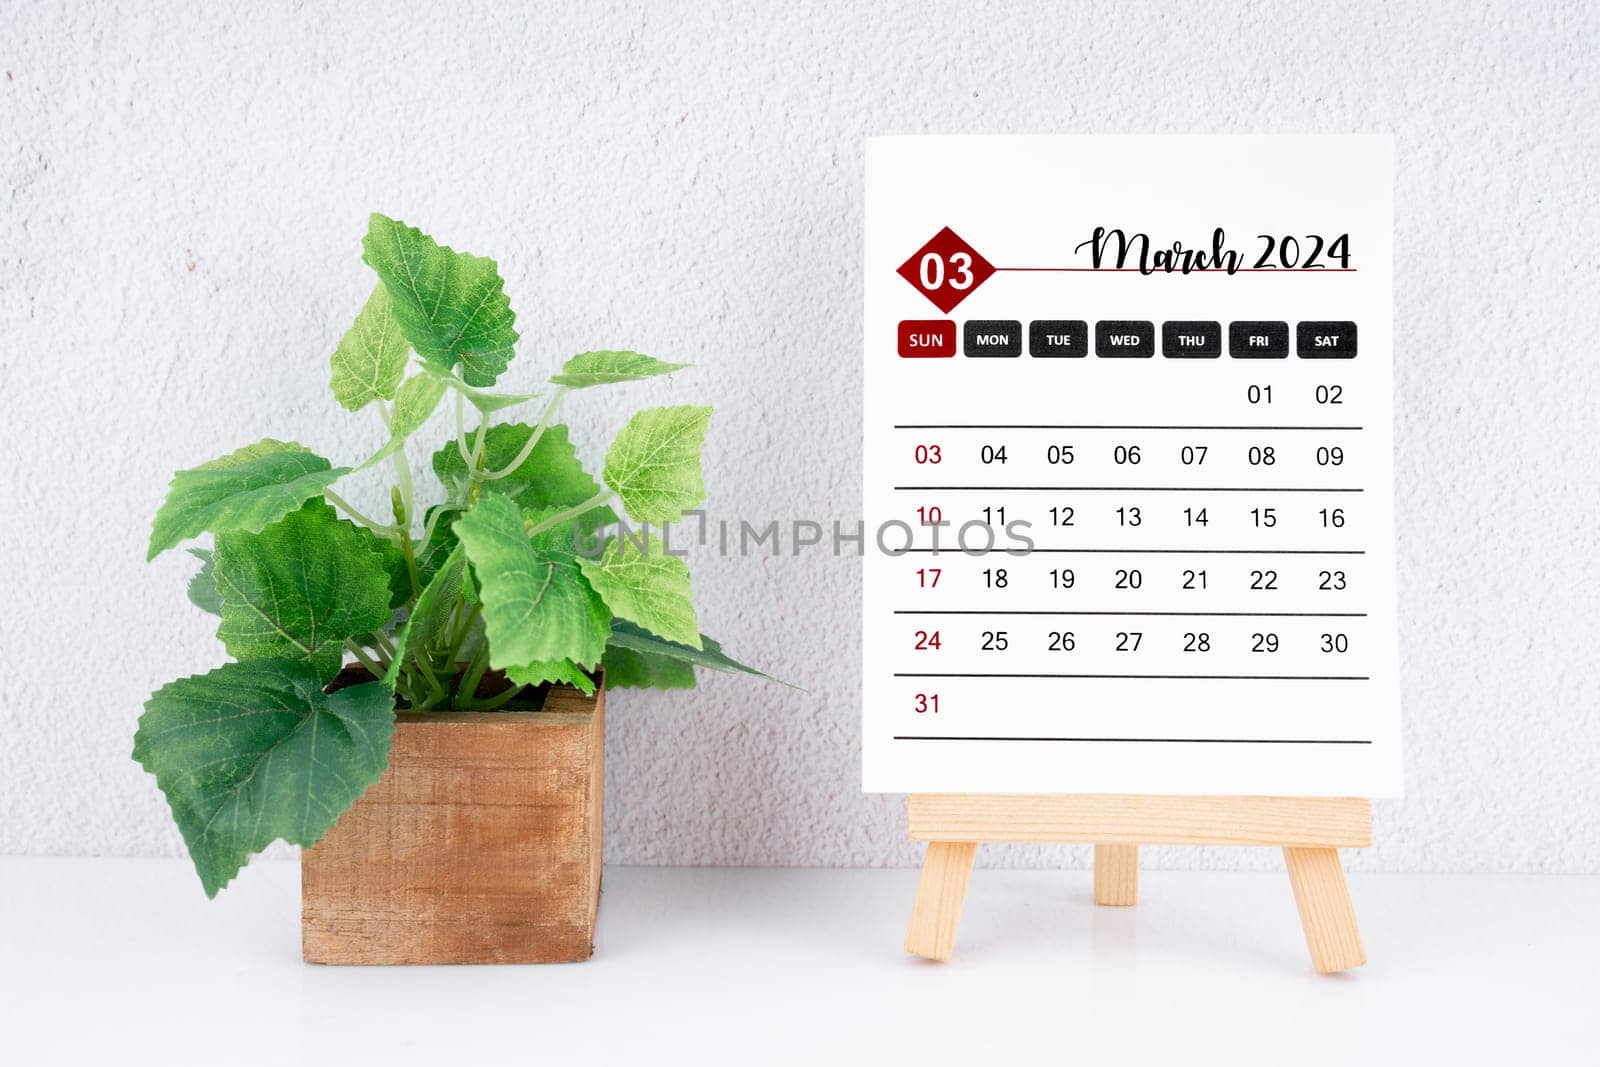 March 2024 calendar page and wooden plant pot on table. by Gamjai